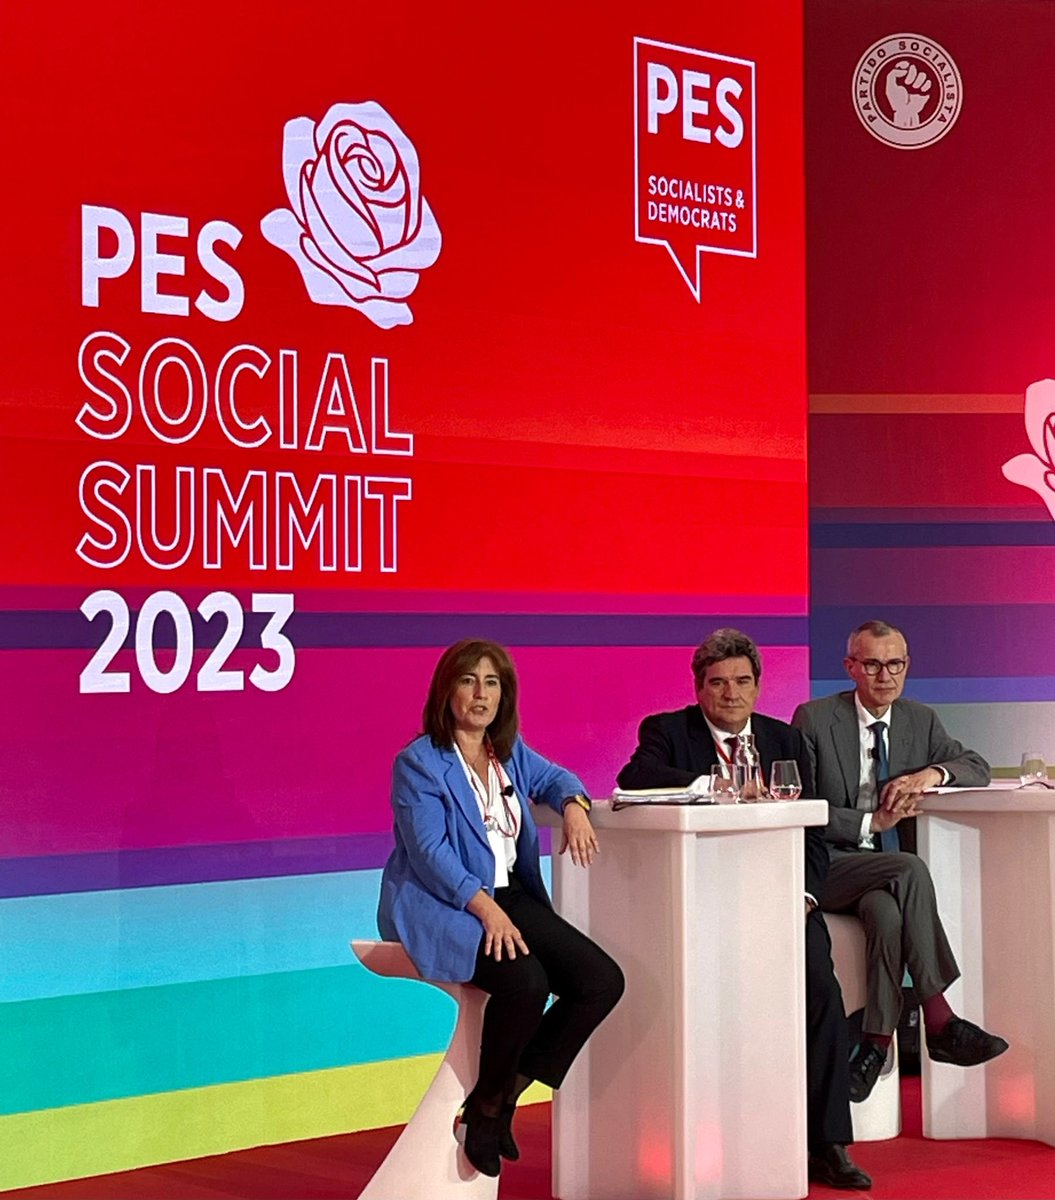 🔴 Minister @Ana_M_MG stresses the importance of the EU #socialpillar  
'We have to make it real. We have to make it felt by people. It's critical to respond to populism & extremism.'
#PESsocialsummit #EPSR #SocialRights #Porto @PES_PSE @PSocialista  1/3